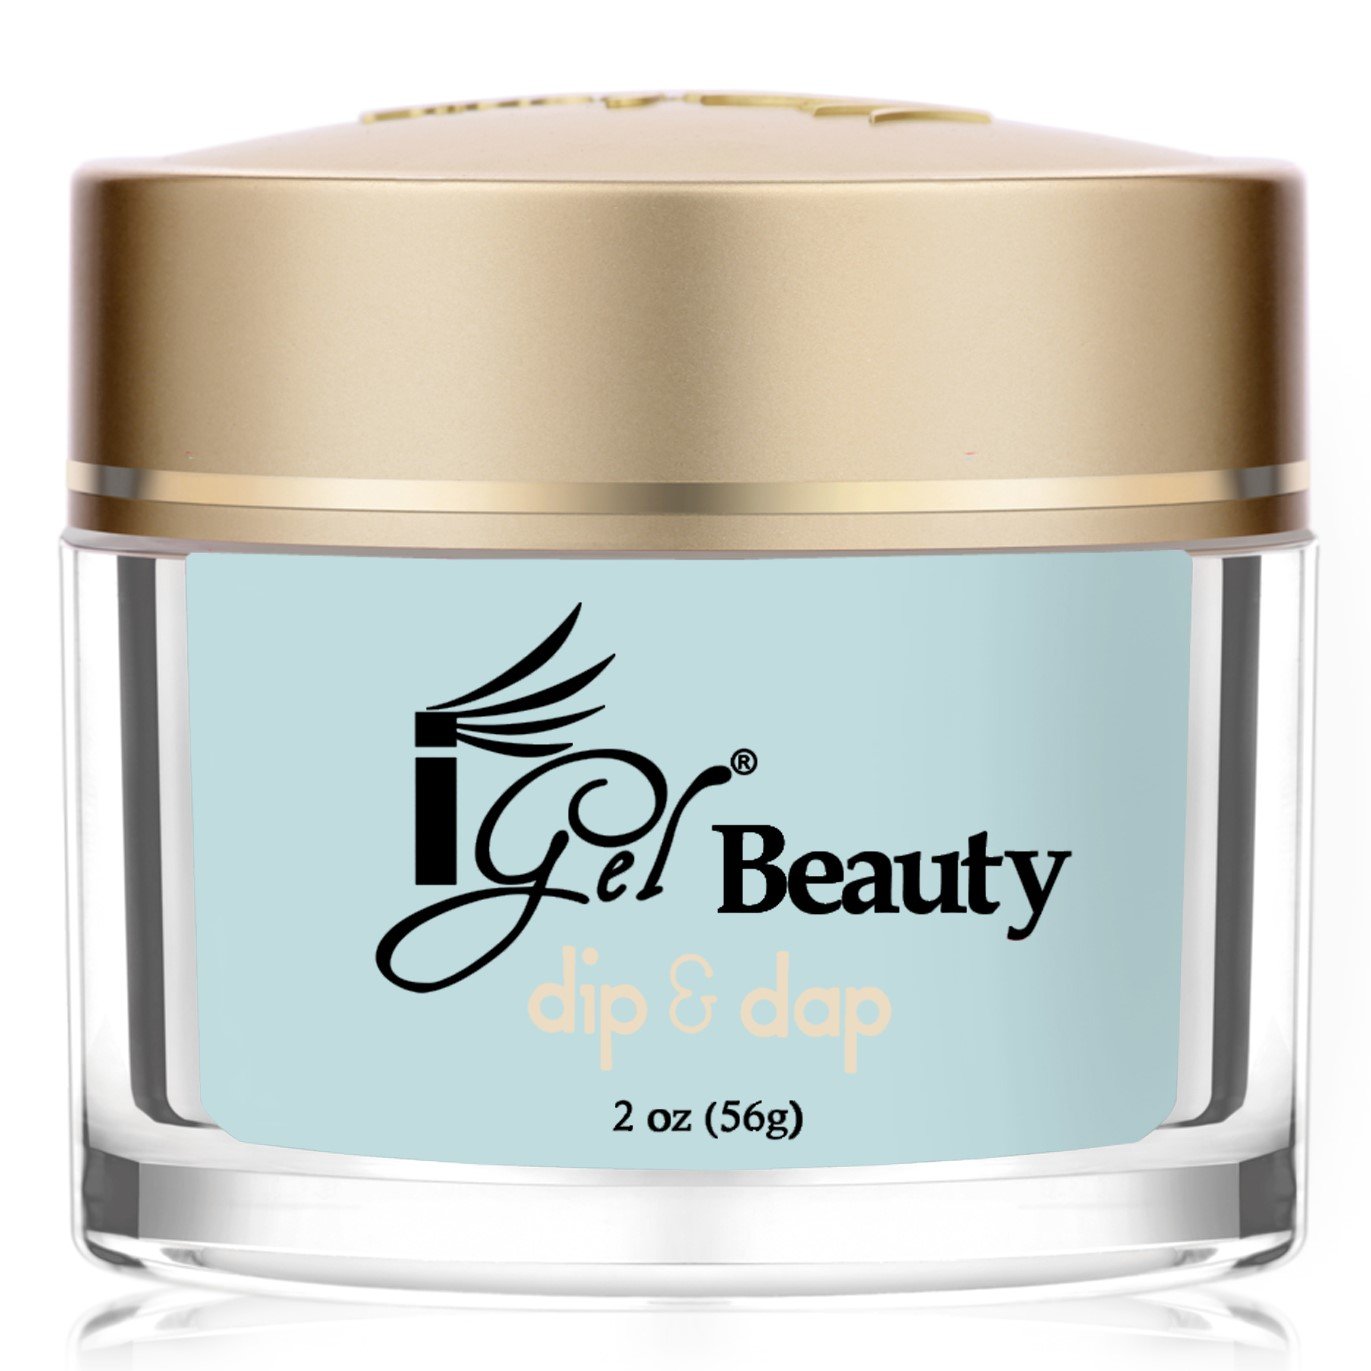 iGel Beauty - Dip & Dap Powder - DD123 Clarity - RECOMMENDED FOR DIP